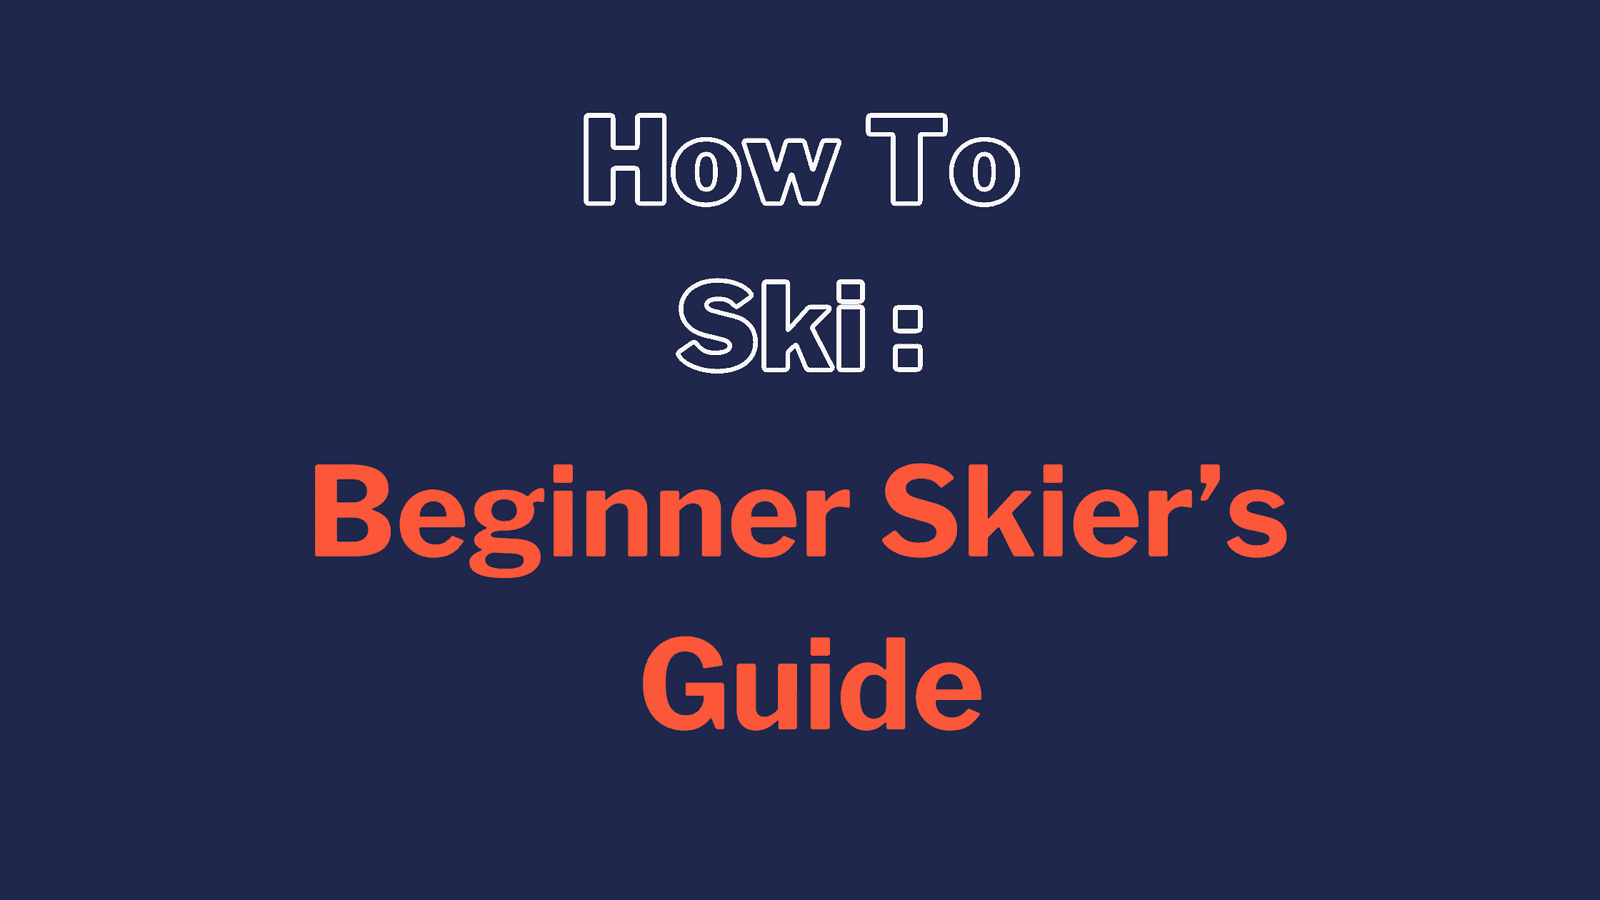 How To Ski: A Beginner Skier's Guide